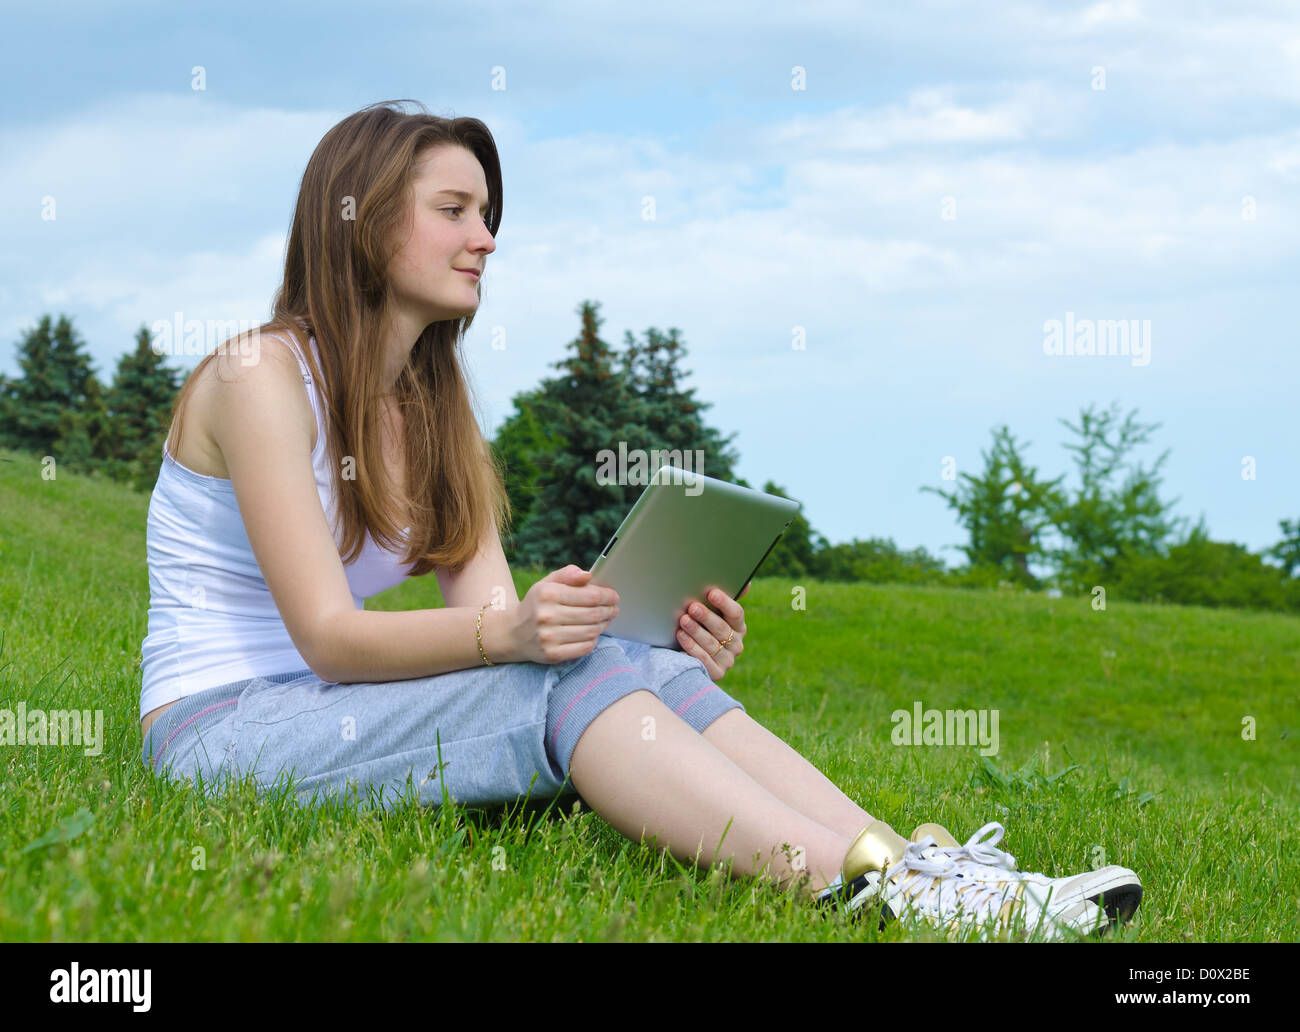 Woman sitting on sloping green grass thinking and staring into the distance with a tablet notebook in her hands Stock Photo